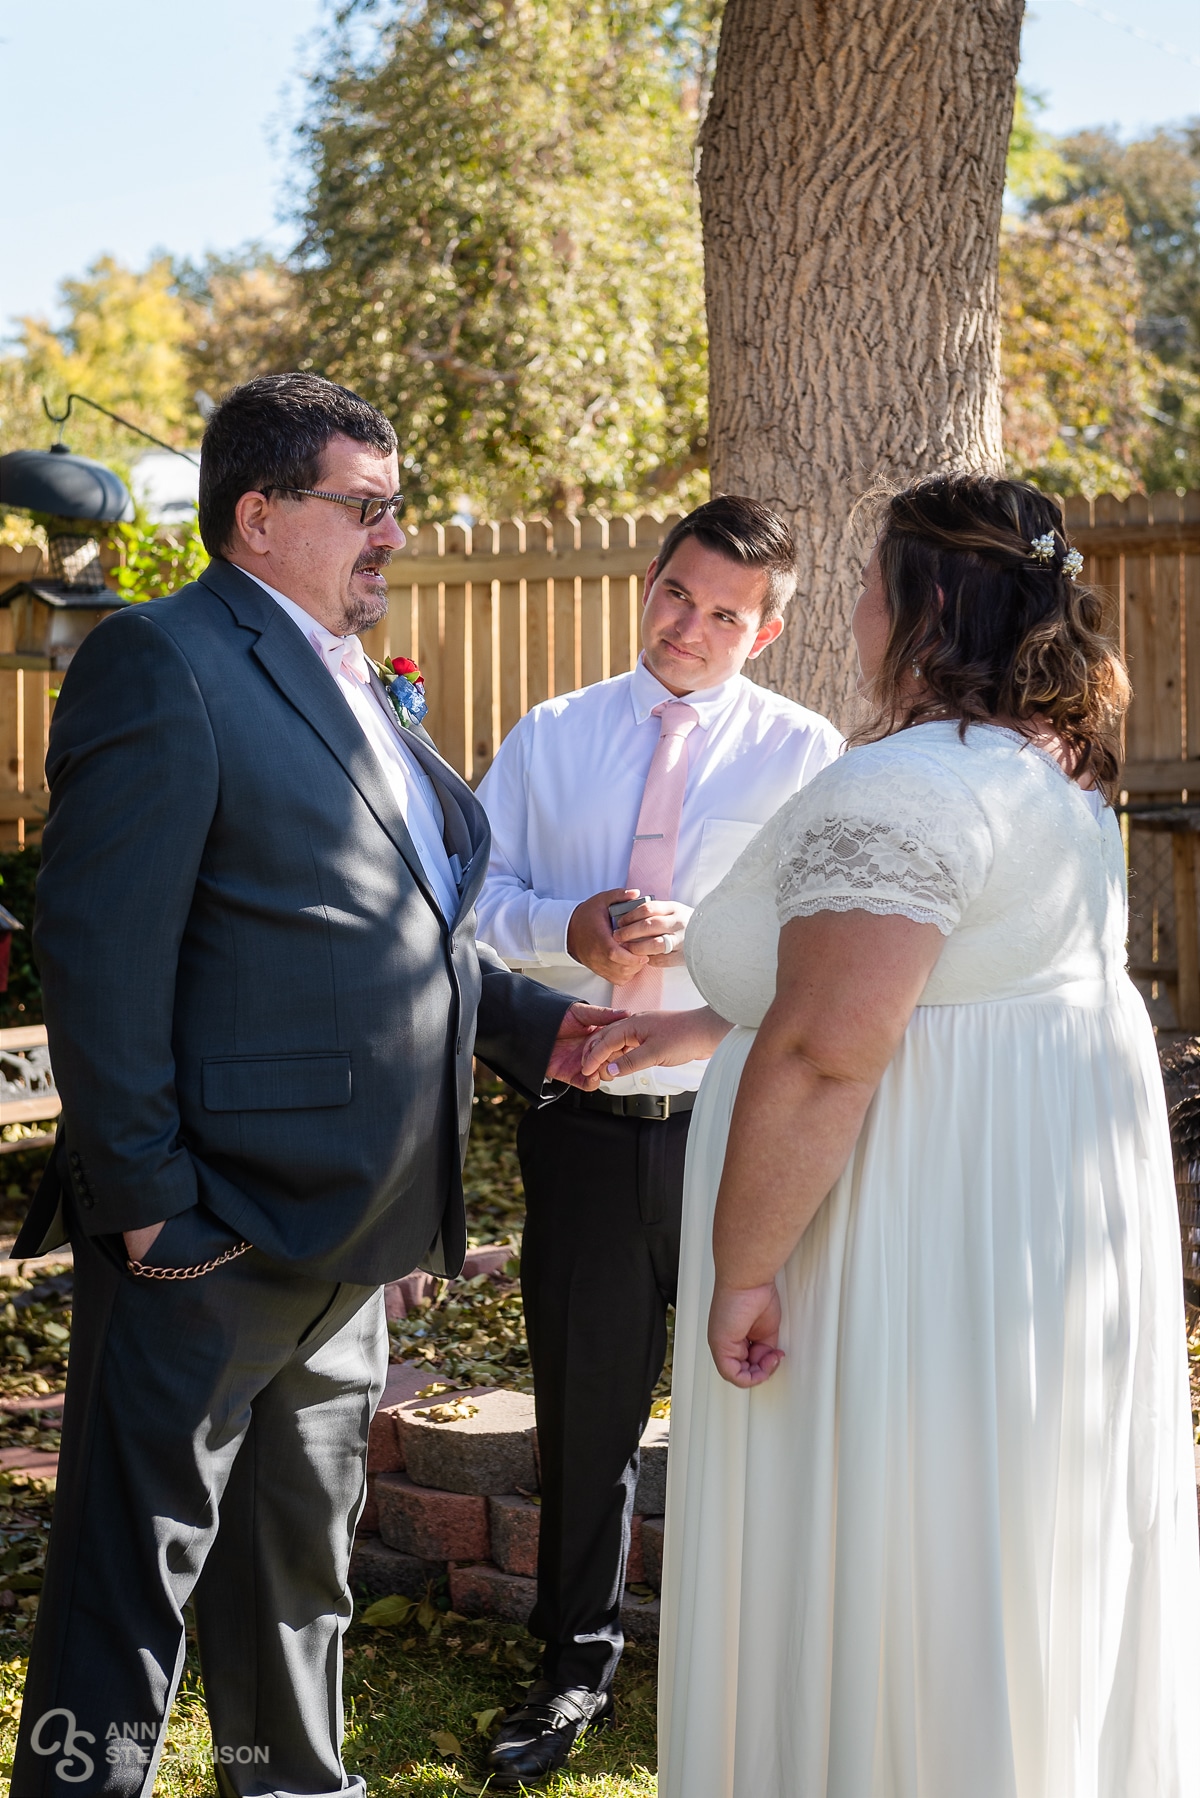 The bride and groom along with the officiant during the outdoor ring ceremony under large trees.